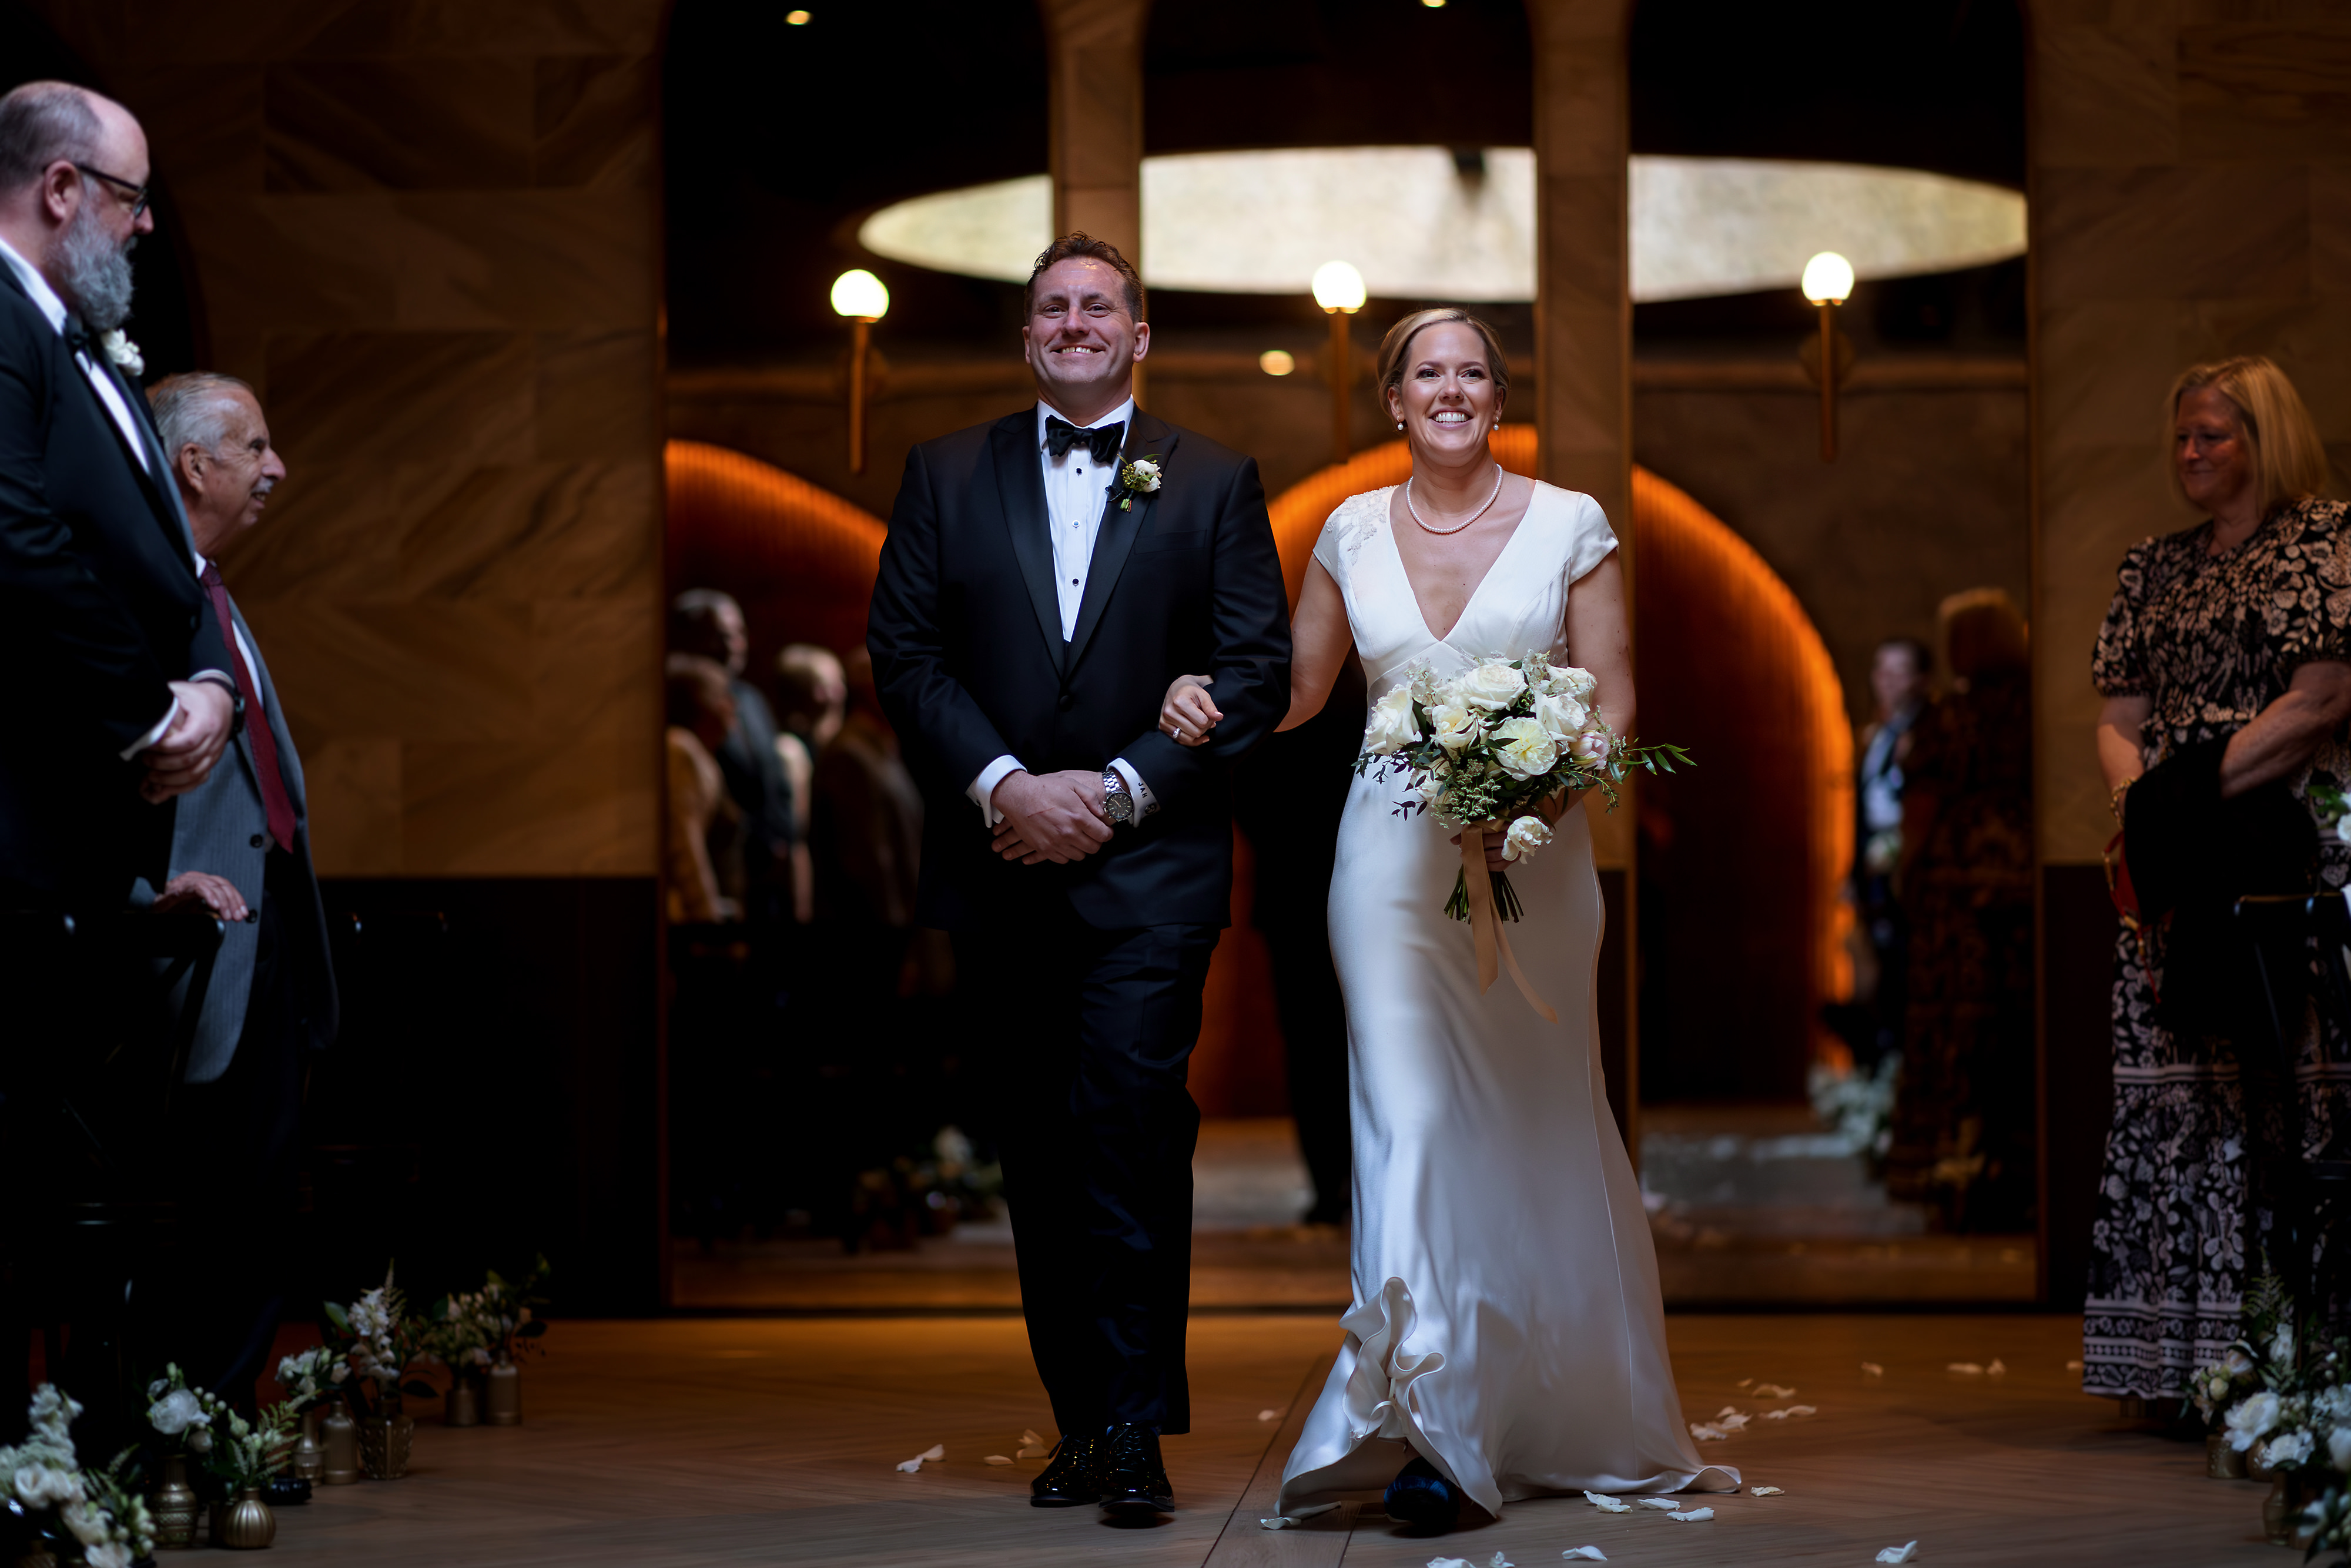 Bride and groom walk down the aisle during wedding ceremony at Chicago Winery